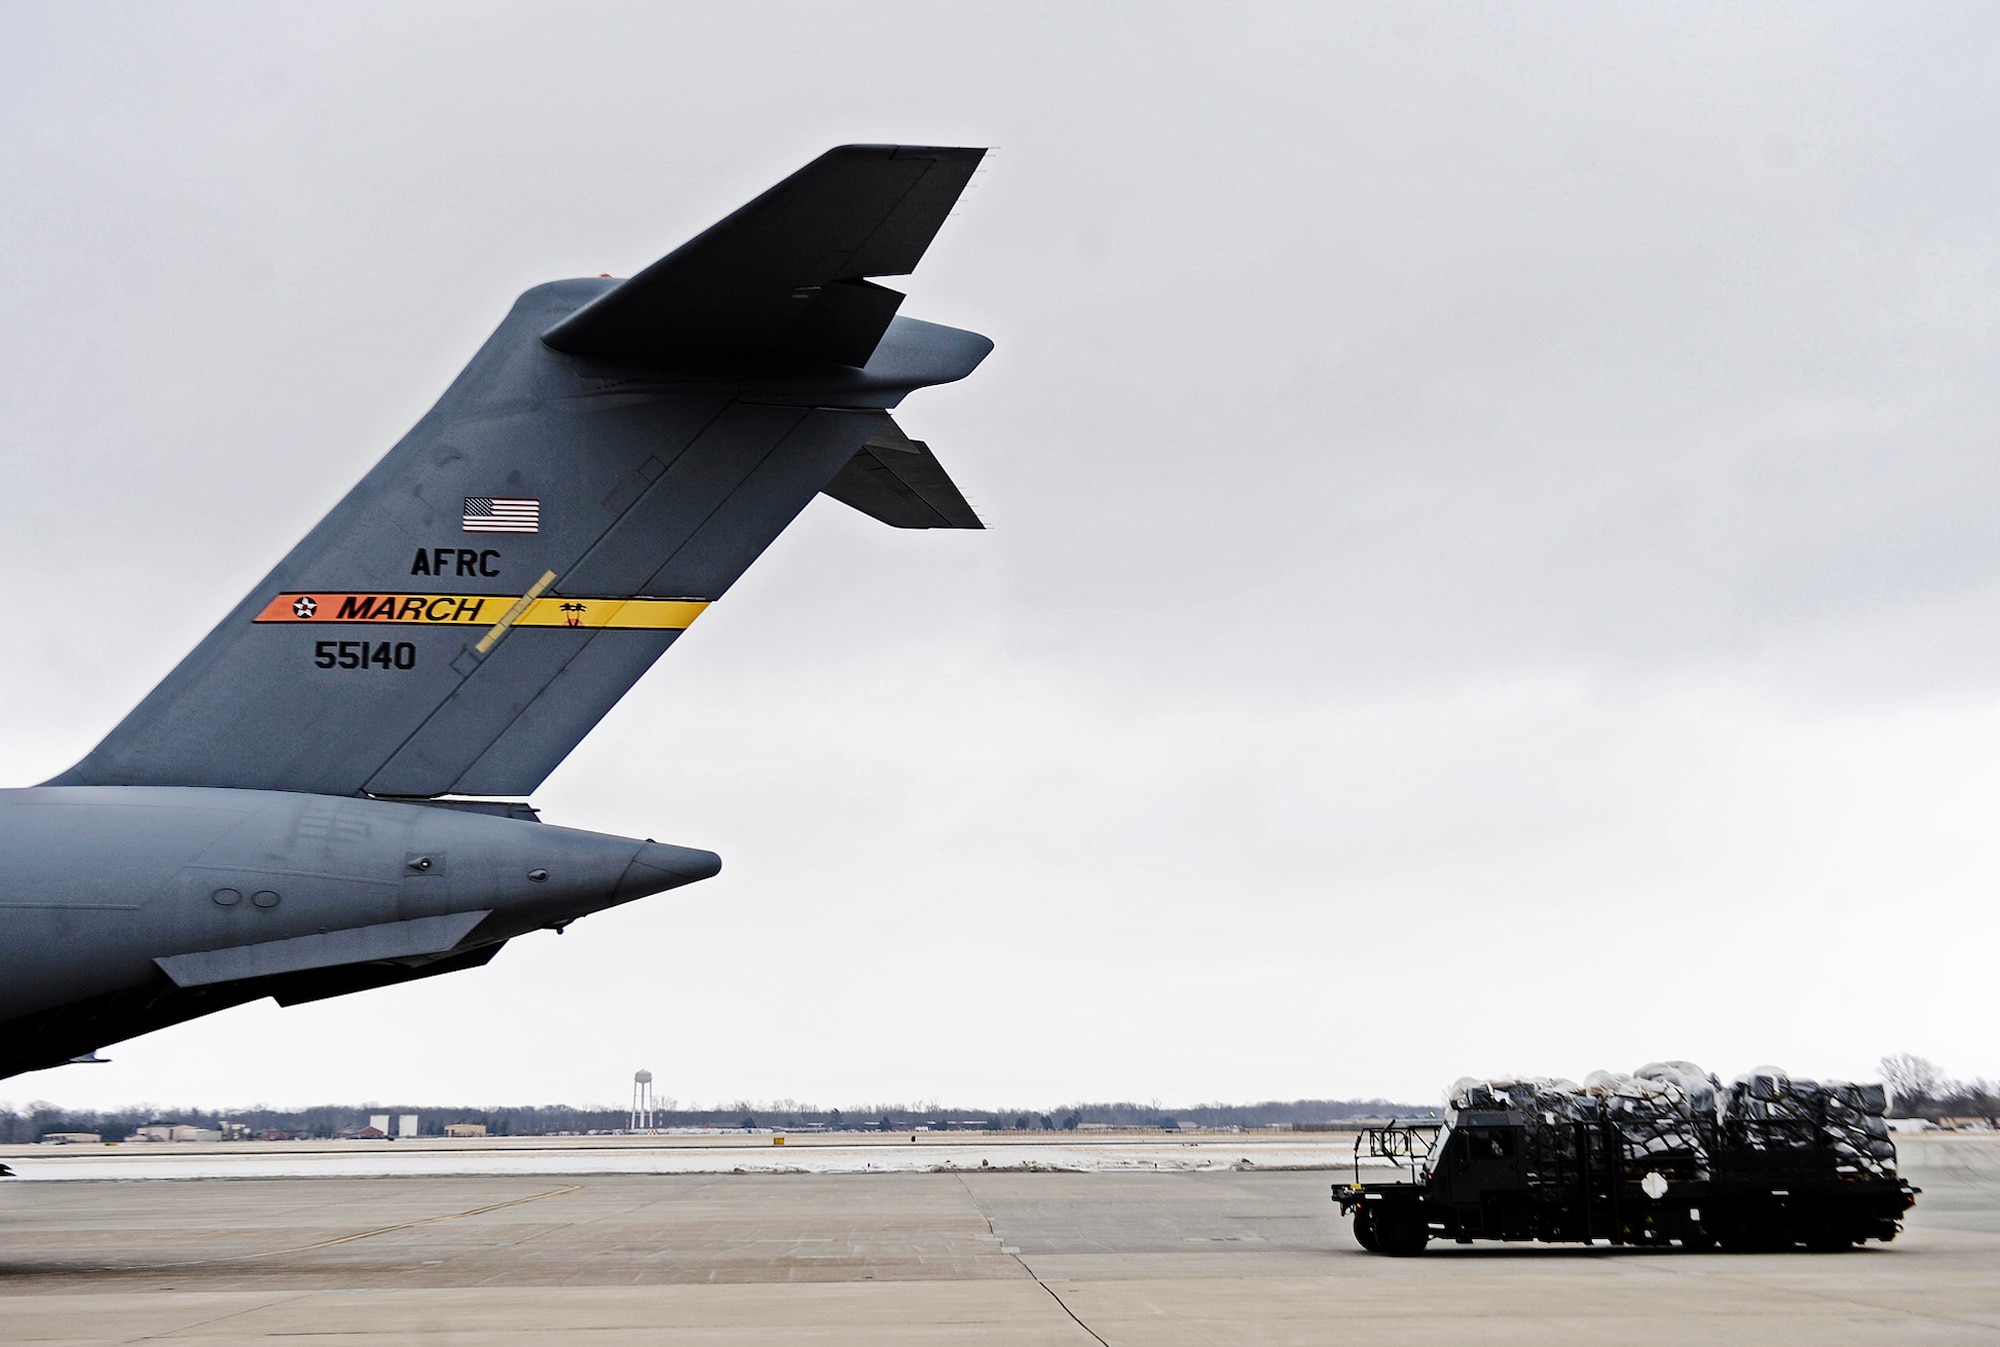 Officials in a cargo truck from the 375th Logistics Readiness Squadron pull up behind a C-17 Globemaster III to load humanitarian aid supplies Feb. 7, 2011, at Scott Air Force Base, Ill. (U.S. Air Force photo/Staff Sgt. Ryan Crane)